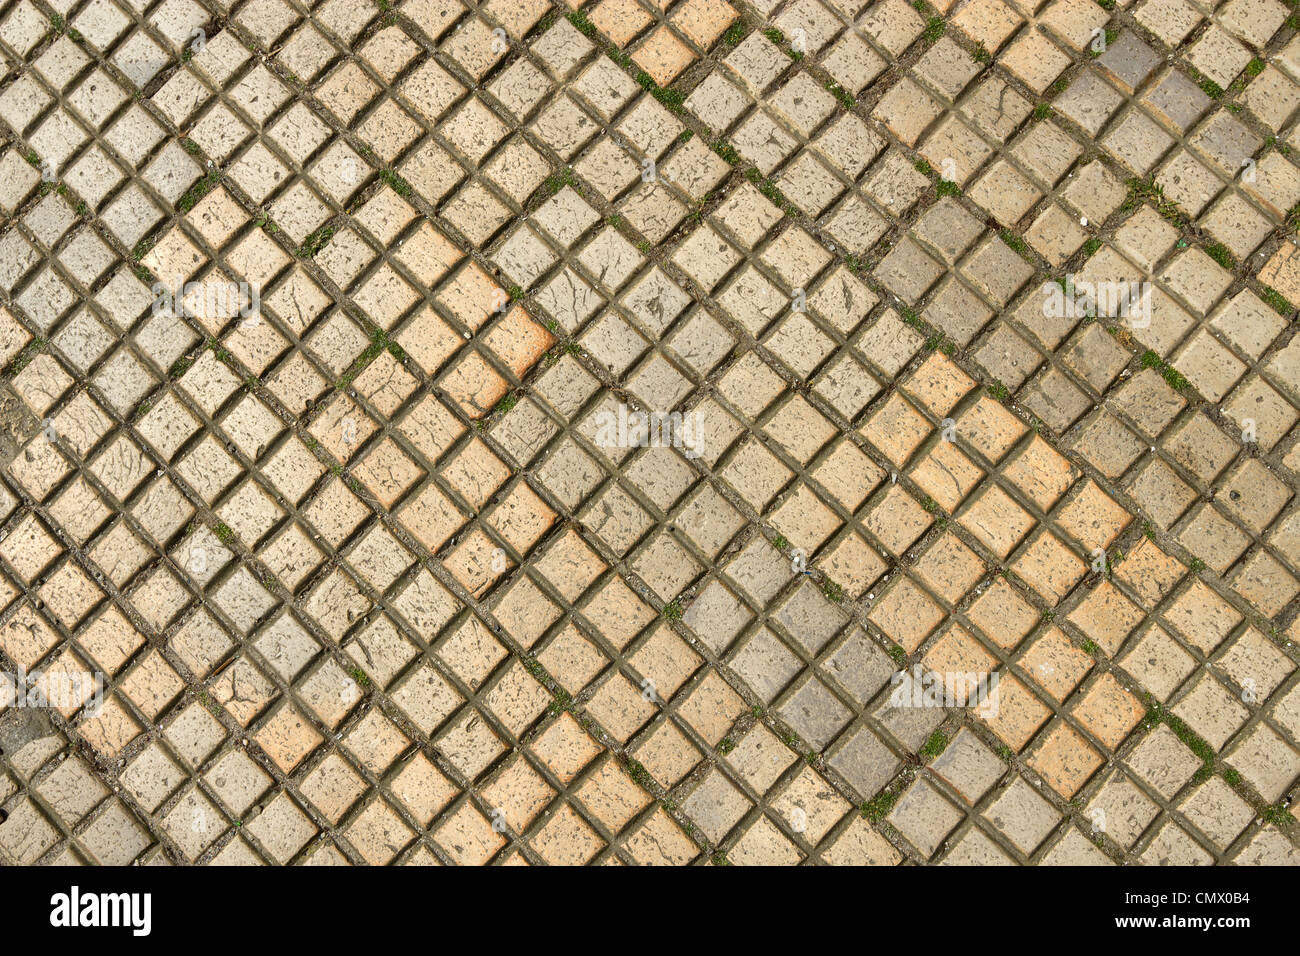 Dirty old beige colour square shapes paving slabs close up. Stock Photo